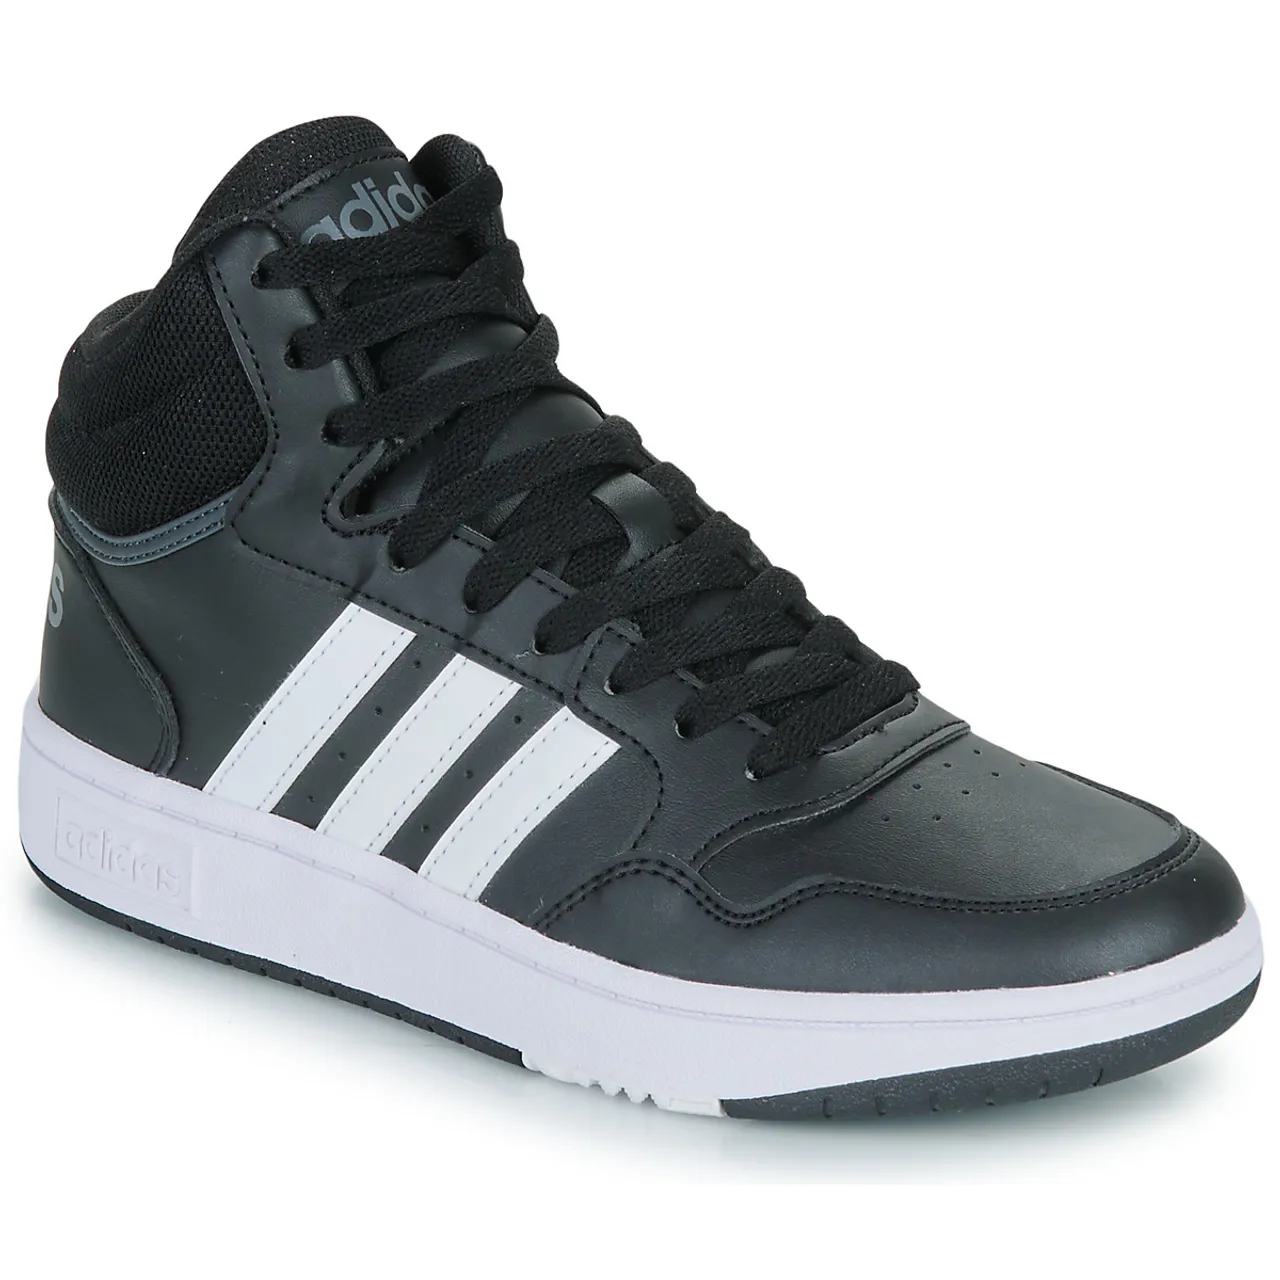 adidas  HOOPS MID 3.0 K  boys's Children's Shoes (High-top Trainers) in Black